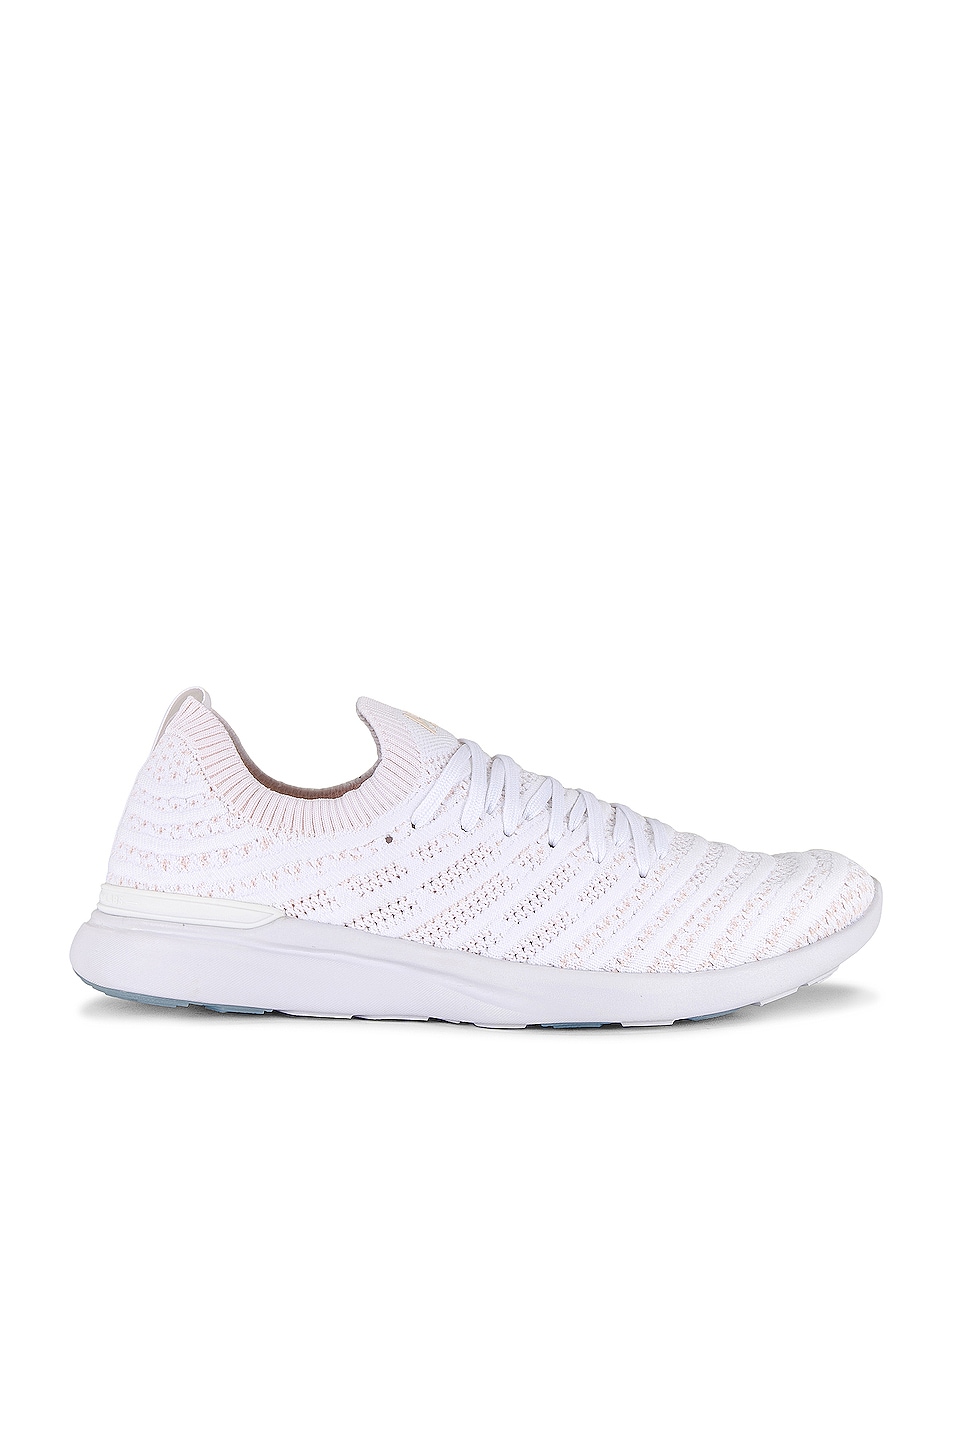 Image 1 of APL: Athletic Propulsion Labs Techloom Wave Sneaker in White & Cream